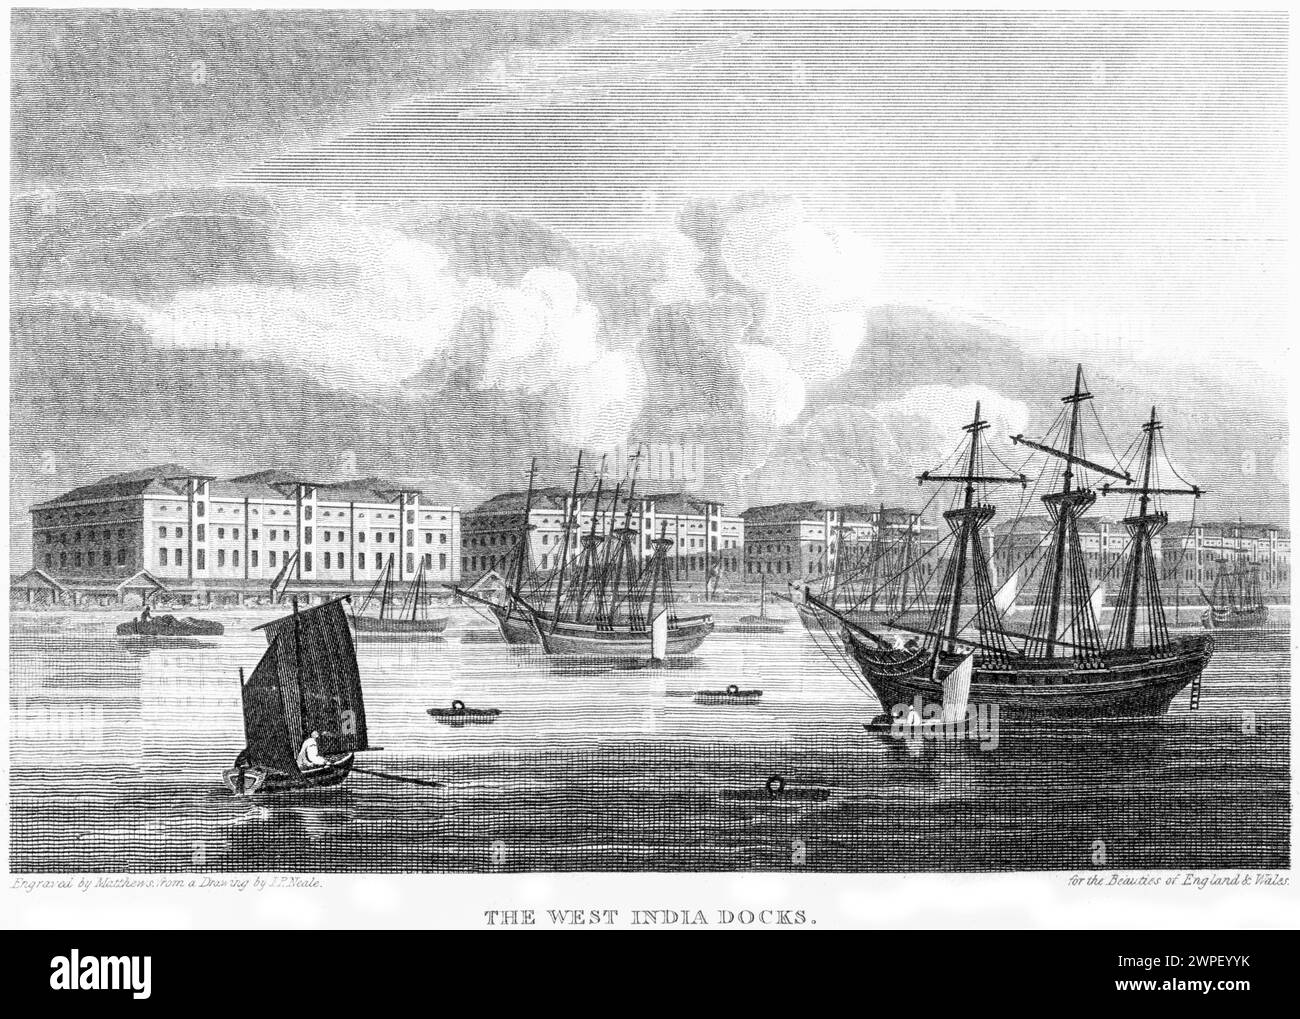 An engraving entitled The West India Docks (now Canary Wharf) London UK scanned at high resolution from a book published around 1815. Stock Photo